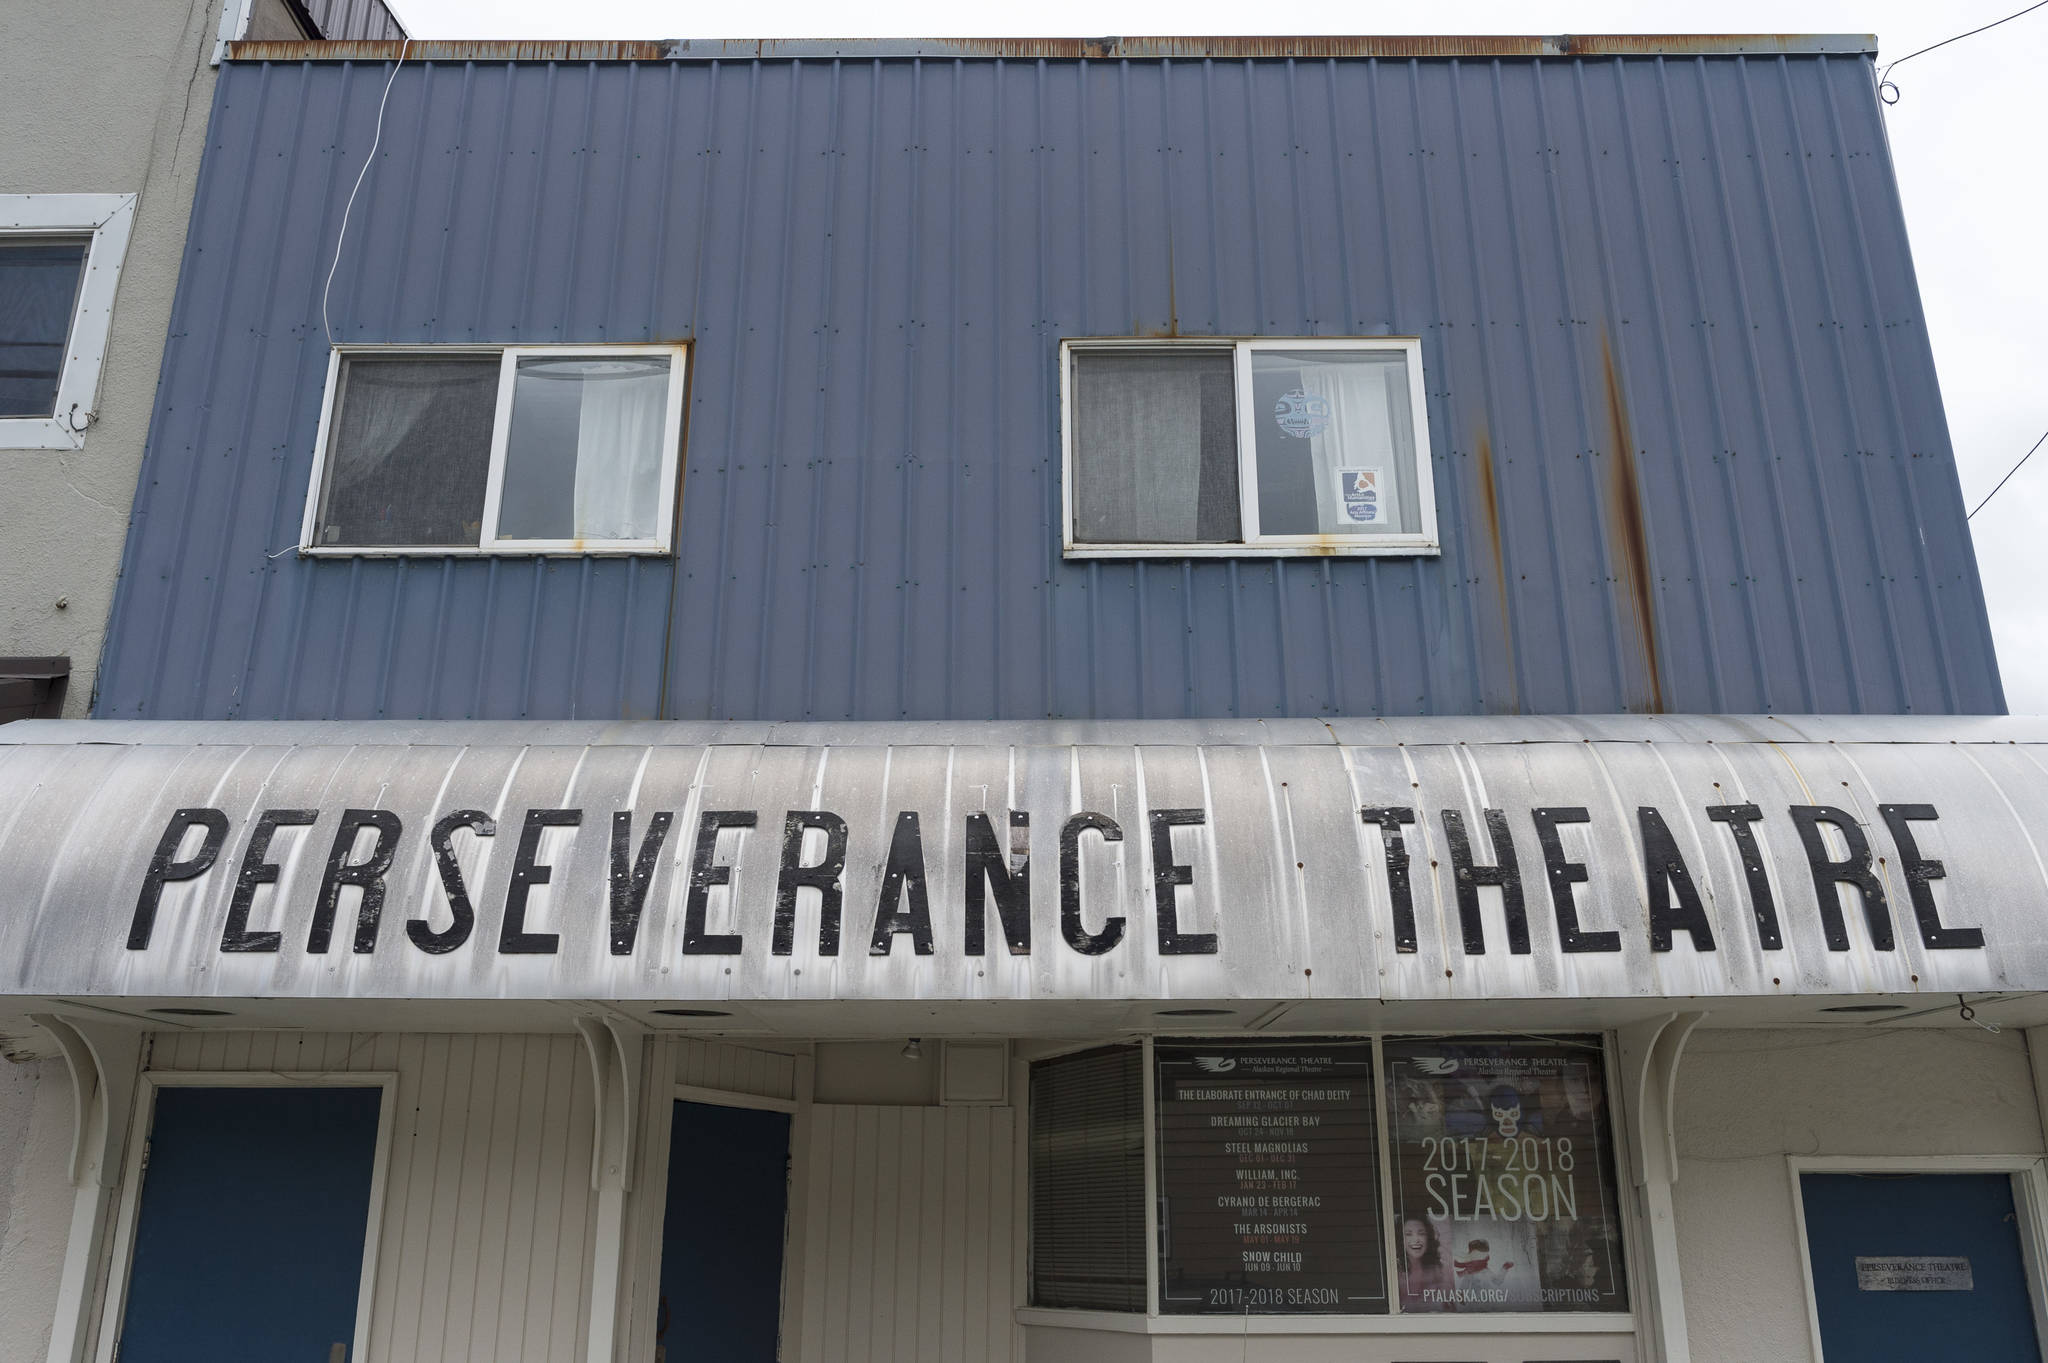 Perseverance Theatre in Douglas was founded in 1979 by Molly Smith and is currently led by Executive Artistic Director Art Rotch. (Michael Penn | Juneau Empire)